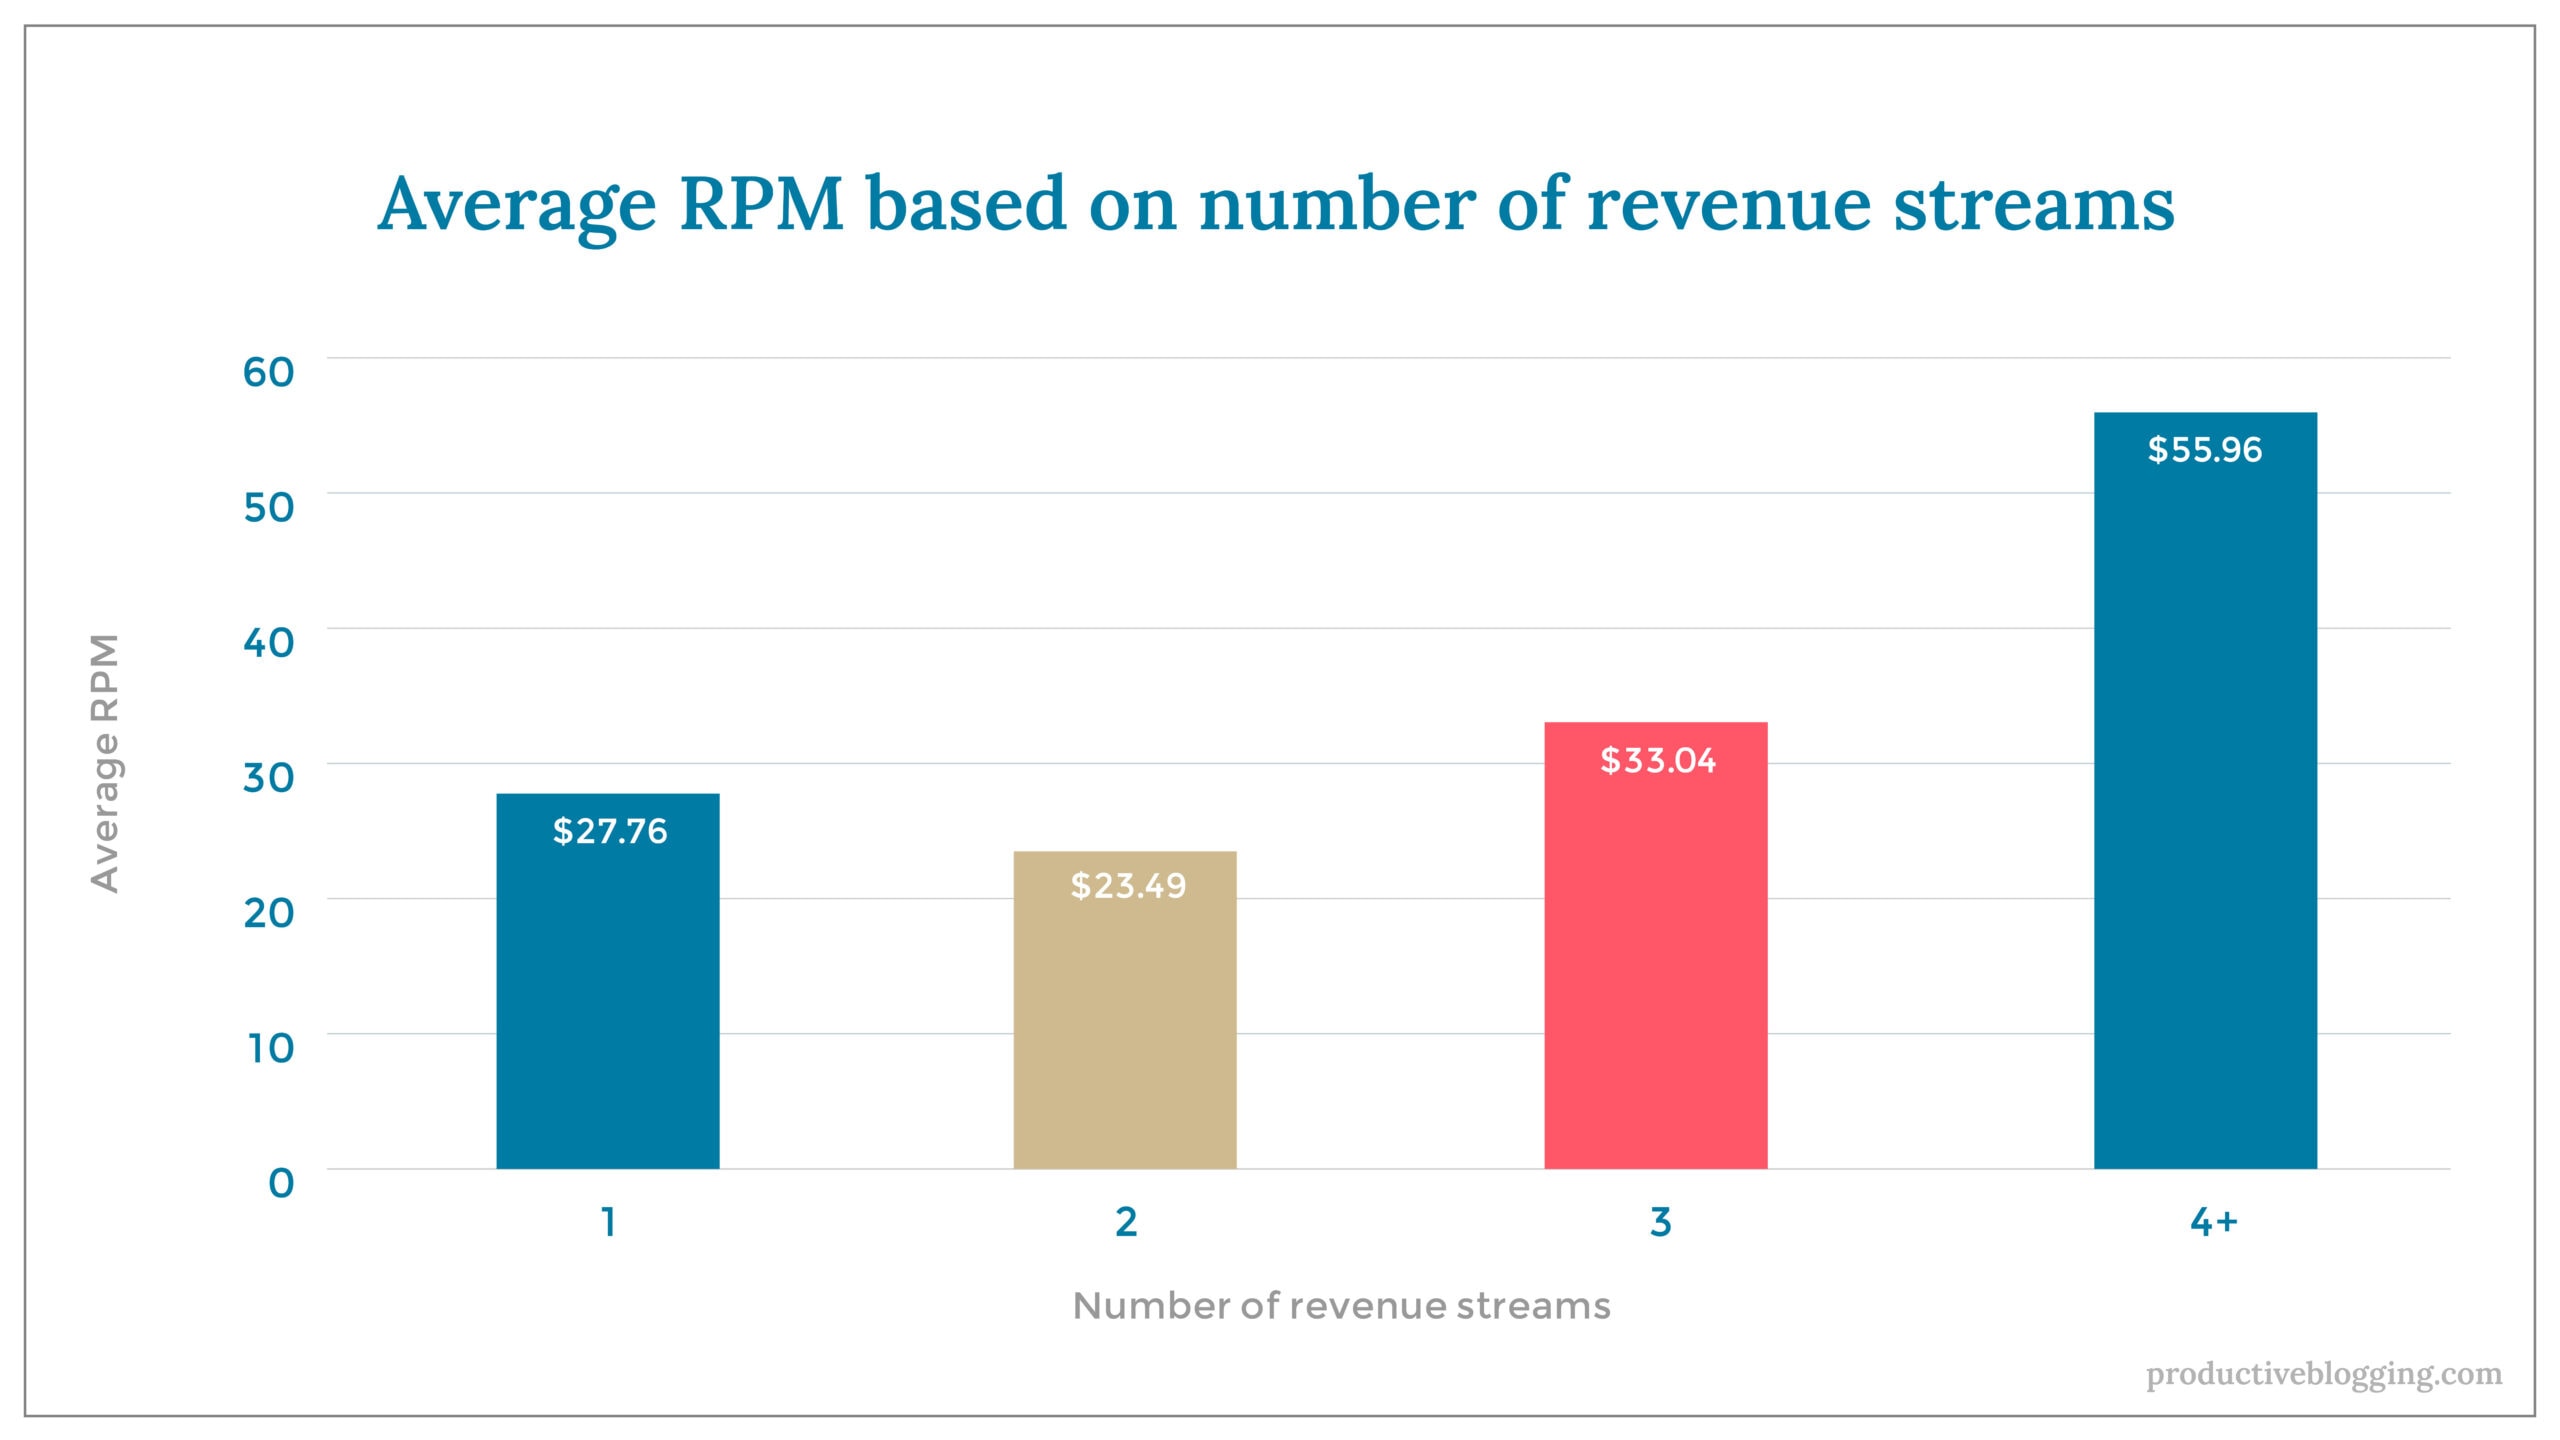 Average RPM based on number of revenue streams X axis: Number of revenue streams Y axis: Average RPM 1 $27.76 2 $23.49 3 $33.04 4+ $55.96